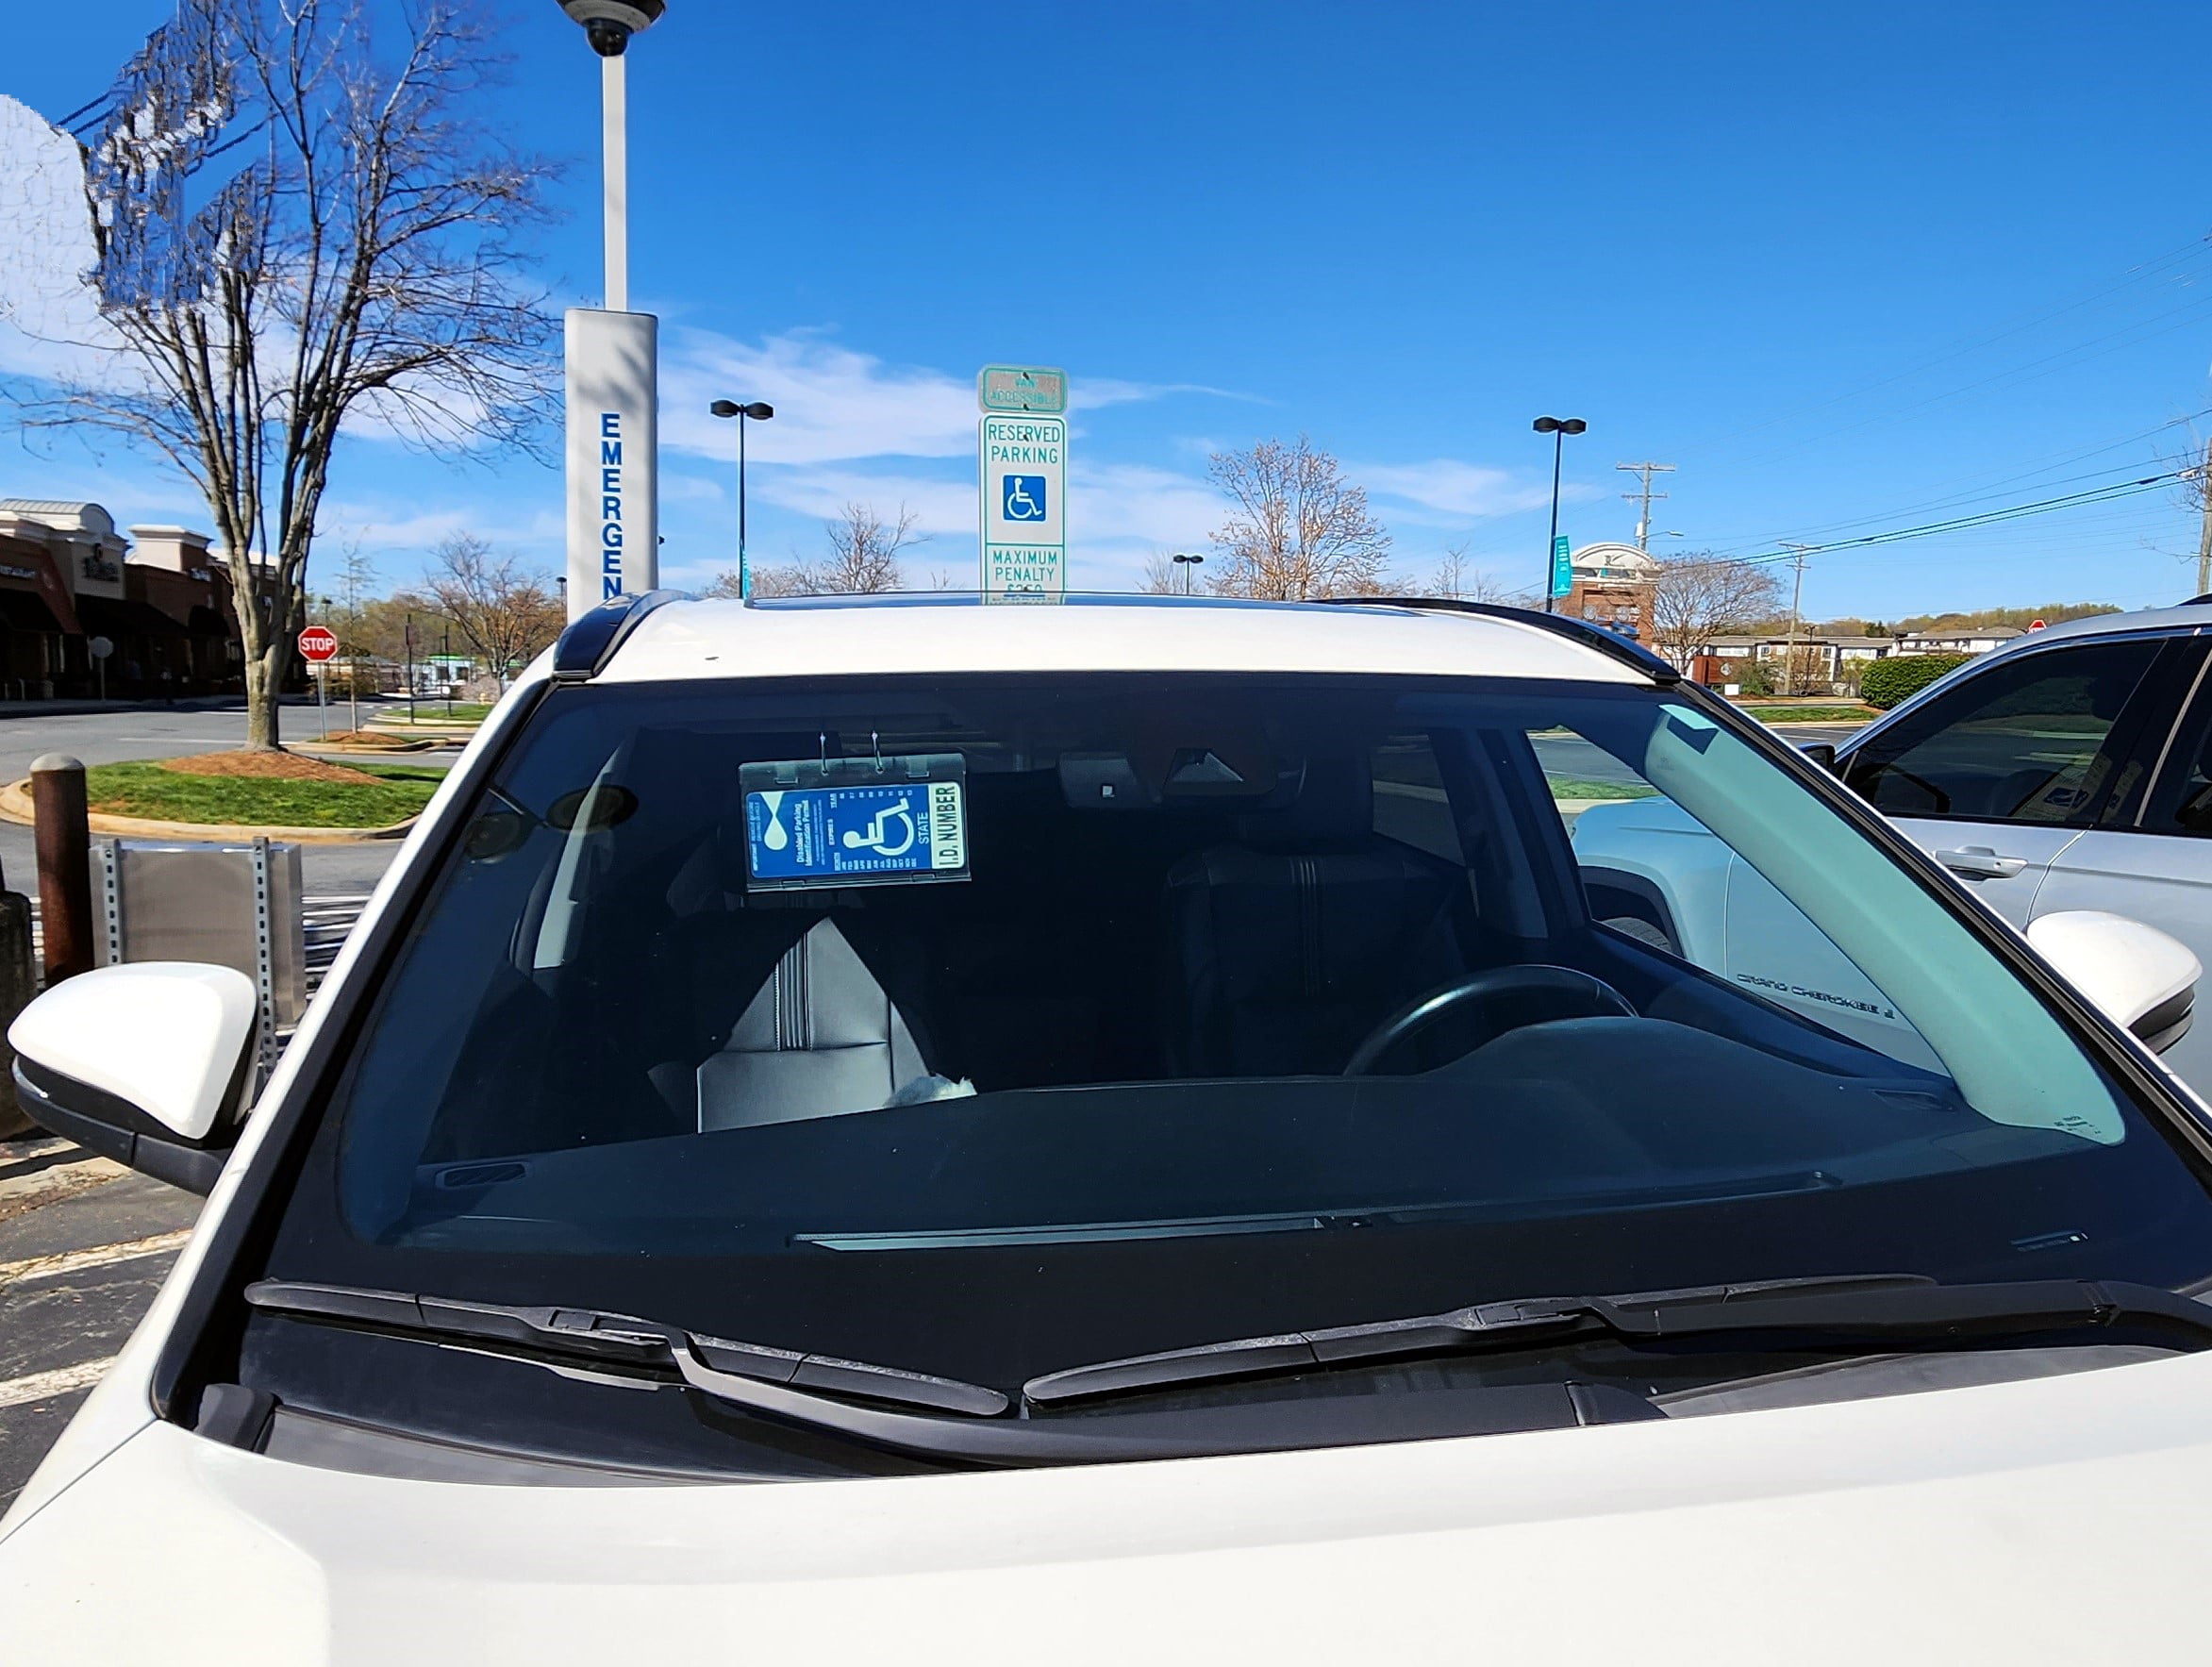 Visortag Horizontal by JL Safety- Best Handicap Placard Holder to Protect,  Display & Fold away your Disabled Parking Permit. Crystal Clear Hard  Plastic Holder for Blue Card Hang Tag. Made in USA 